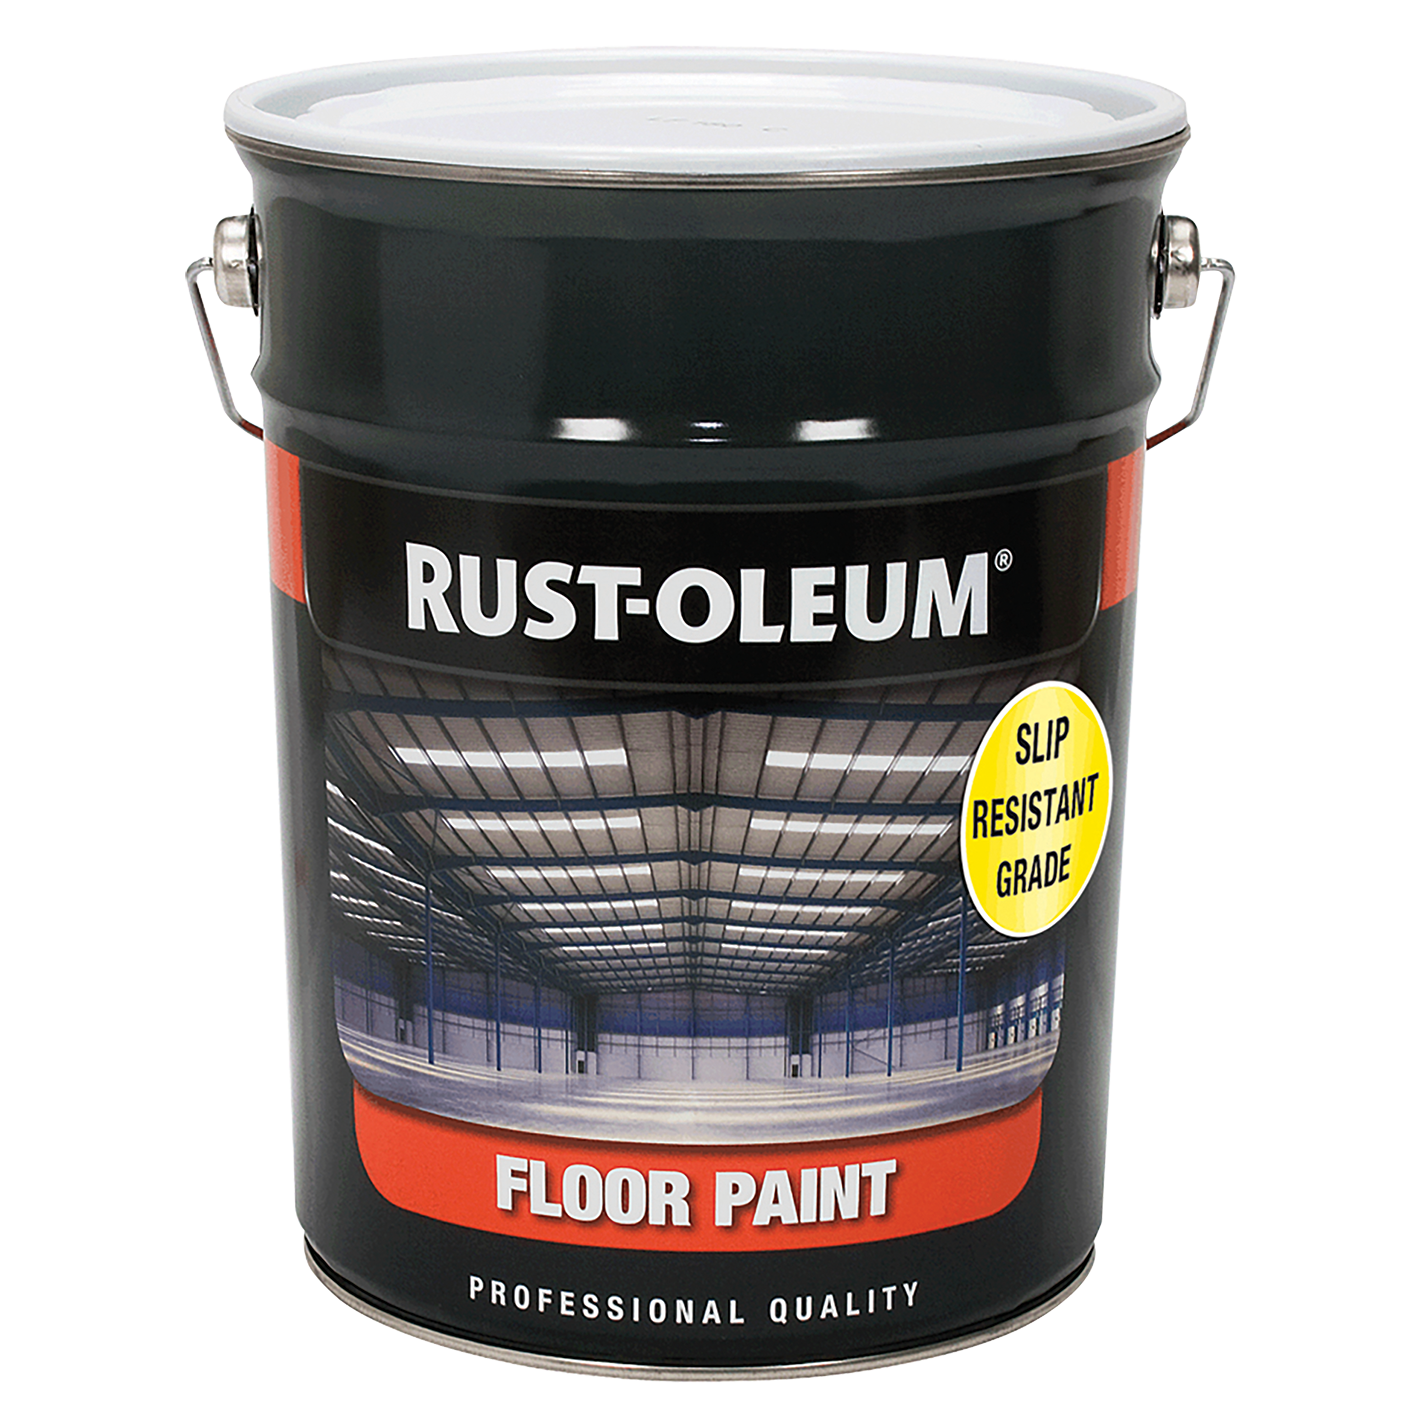 SAFETY YELLOW SLIP RES FLOOR PAINT 5LTR